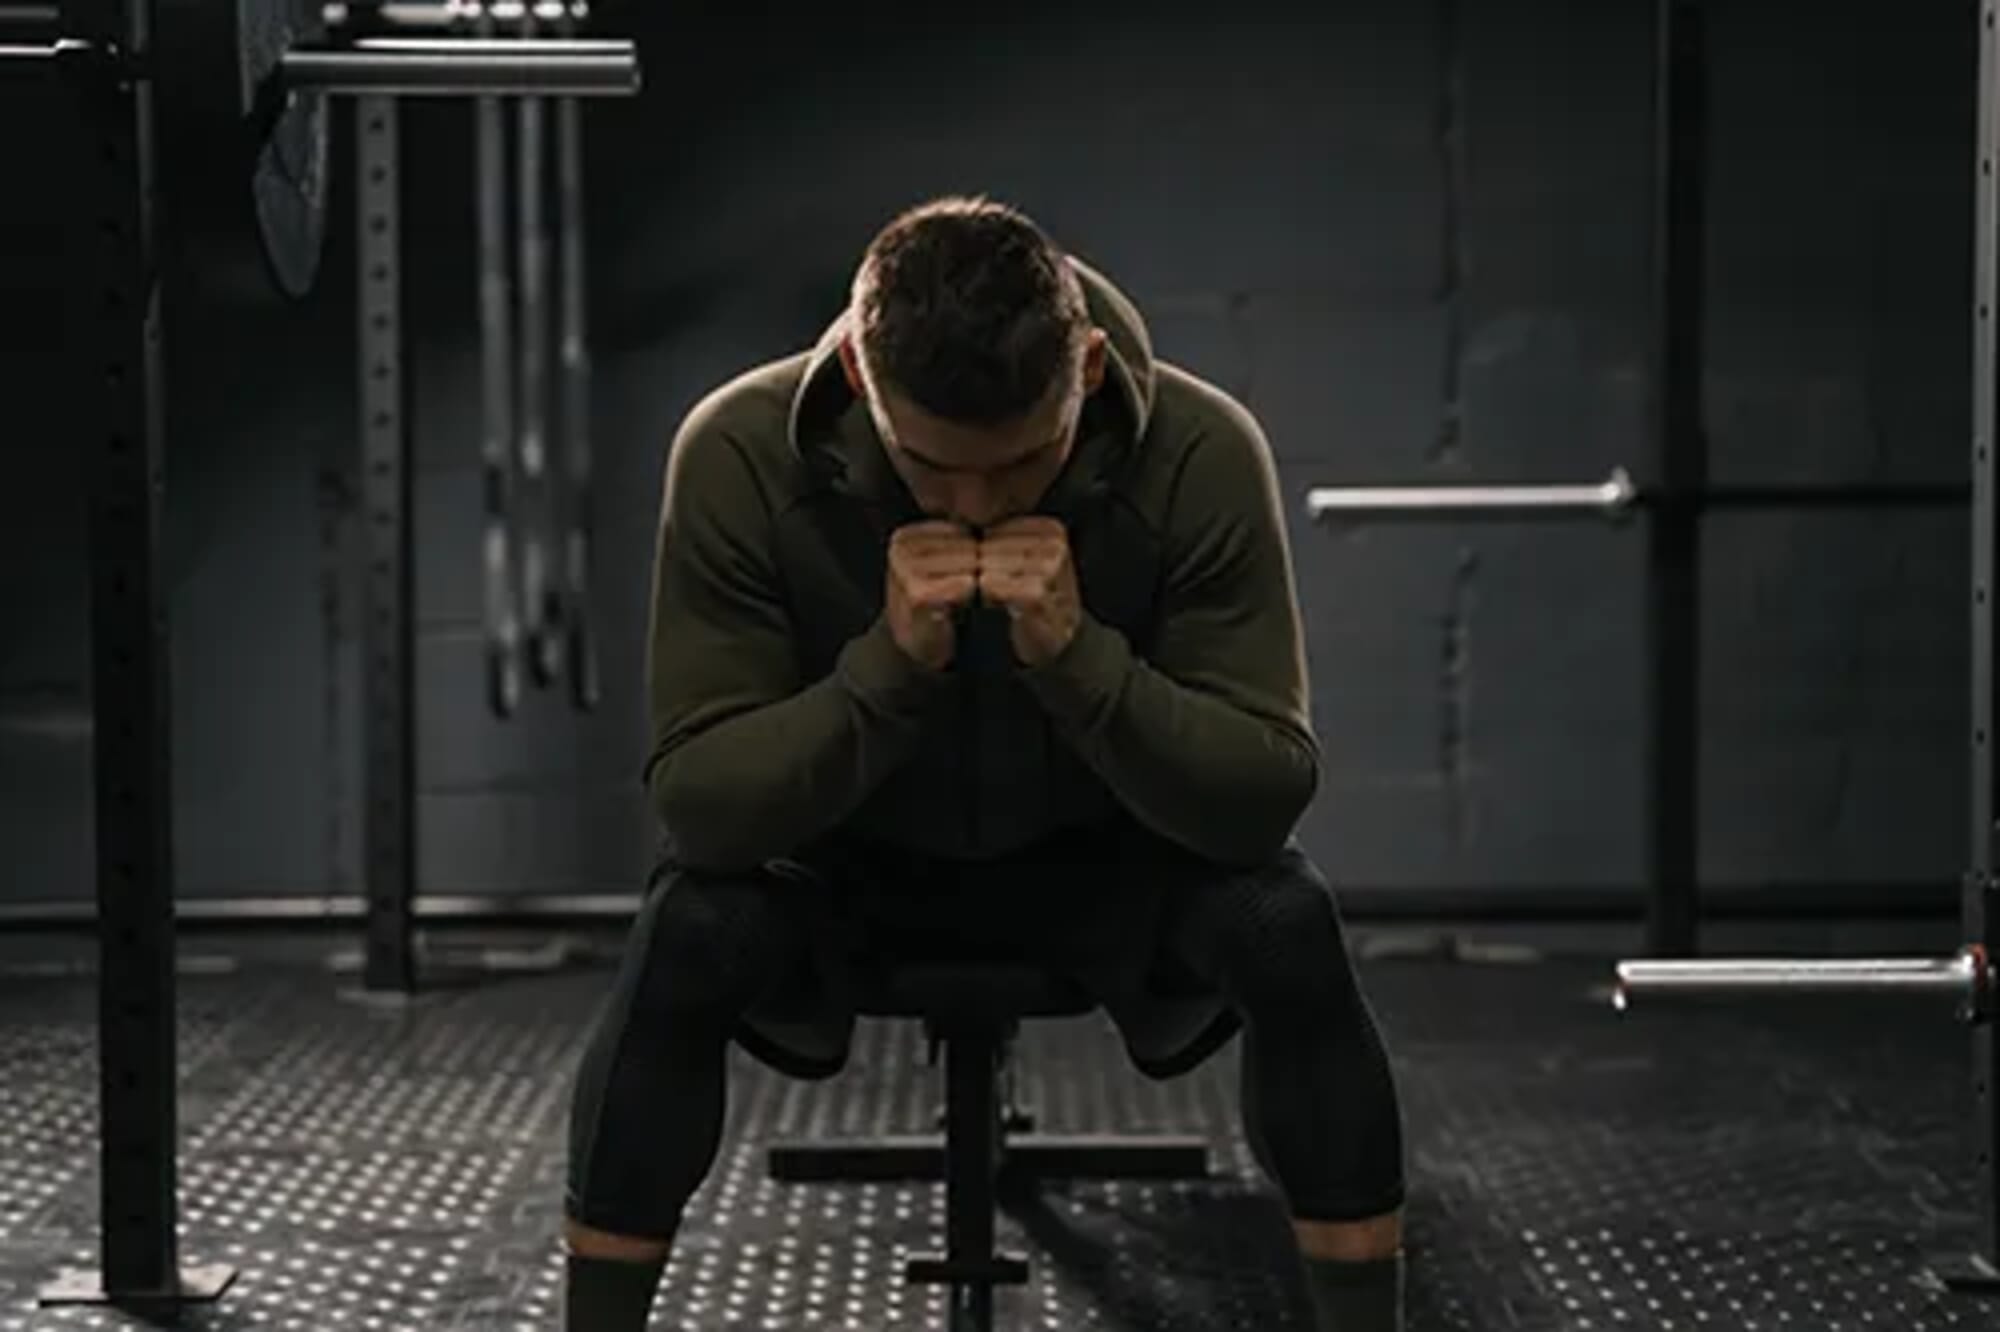 strong-sporty-man-sitting-on-gym-bench-suffering-breakdown-to-overcome-demotivation-sport-concept